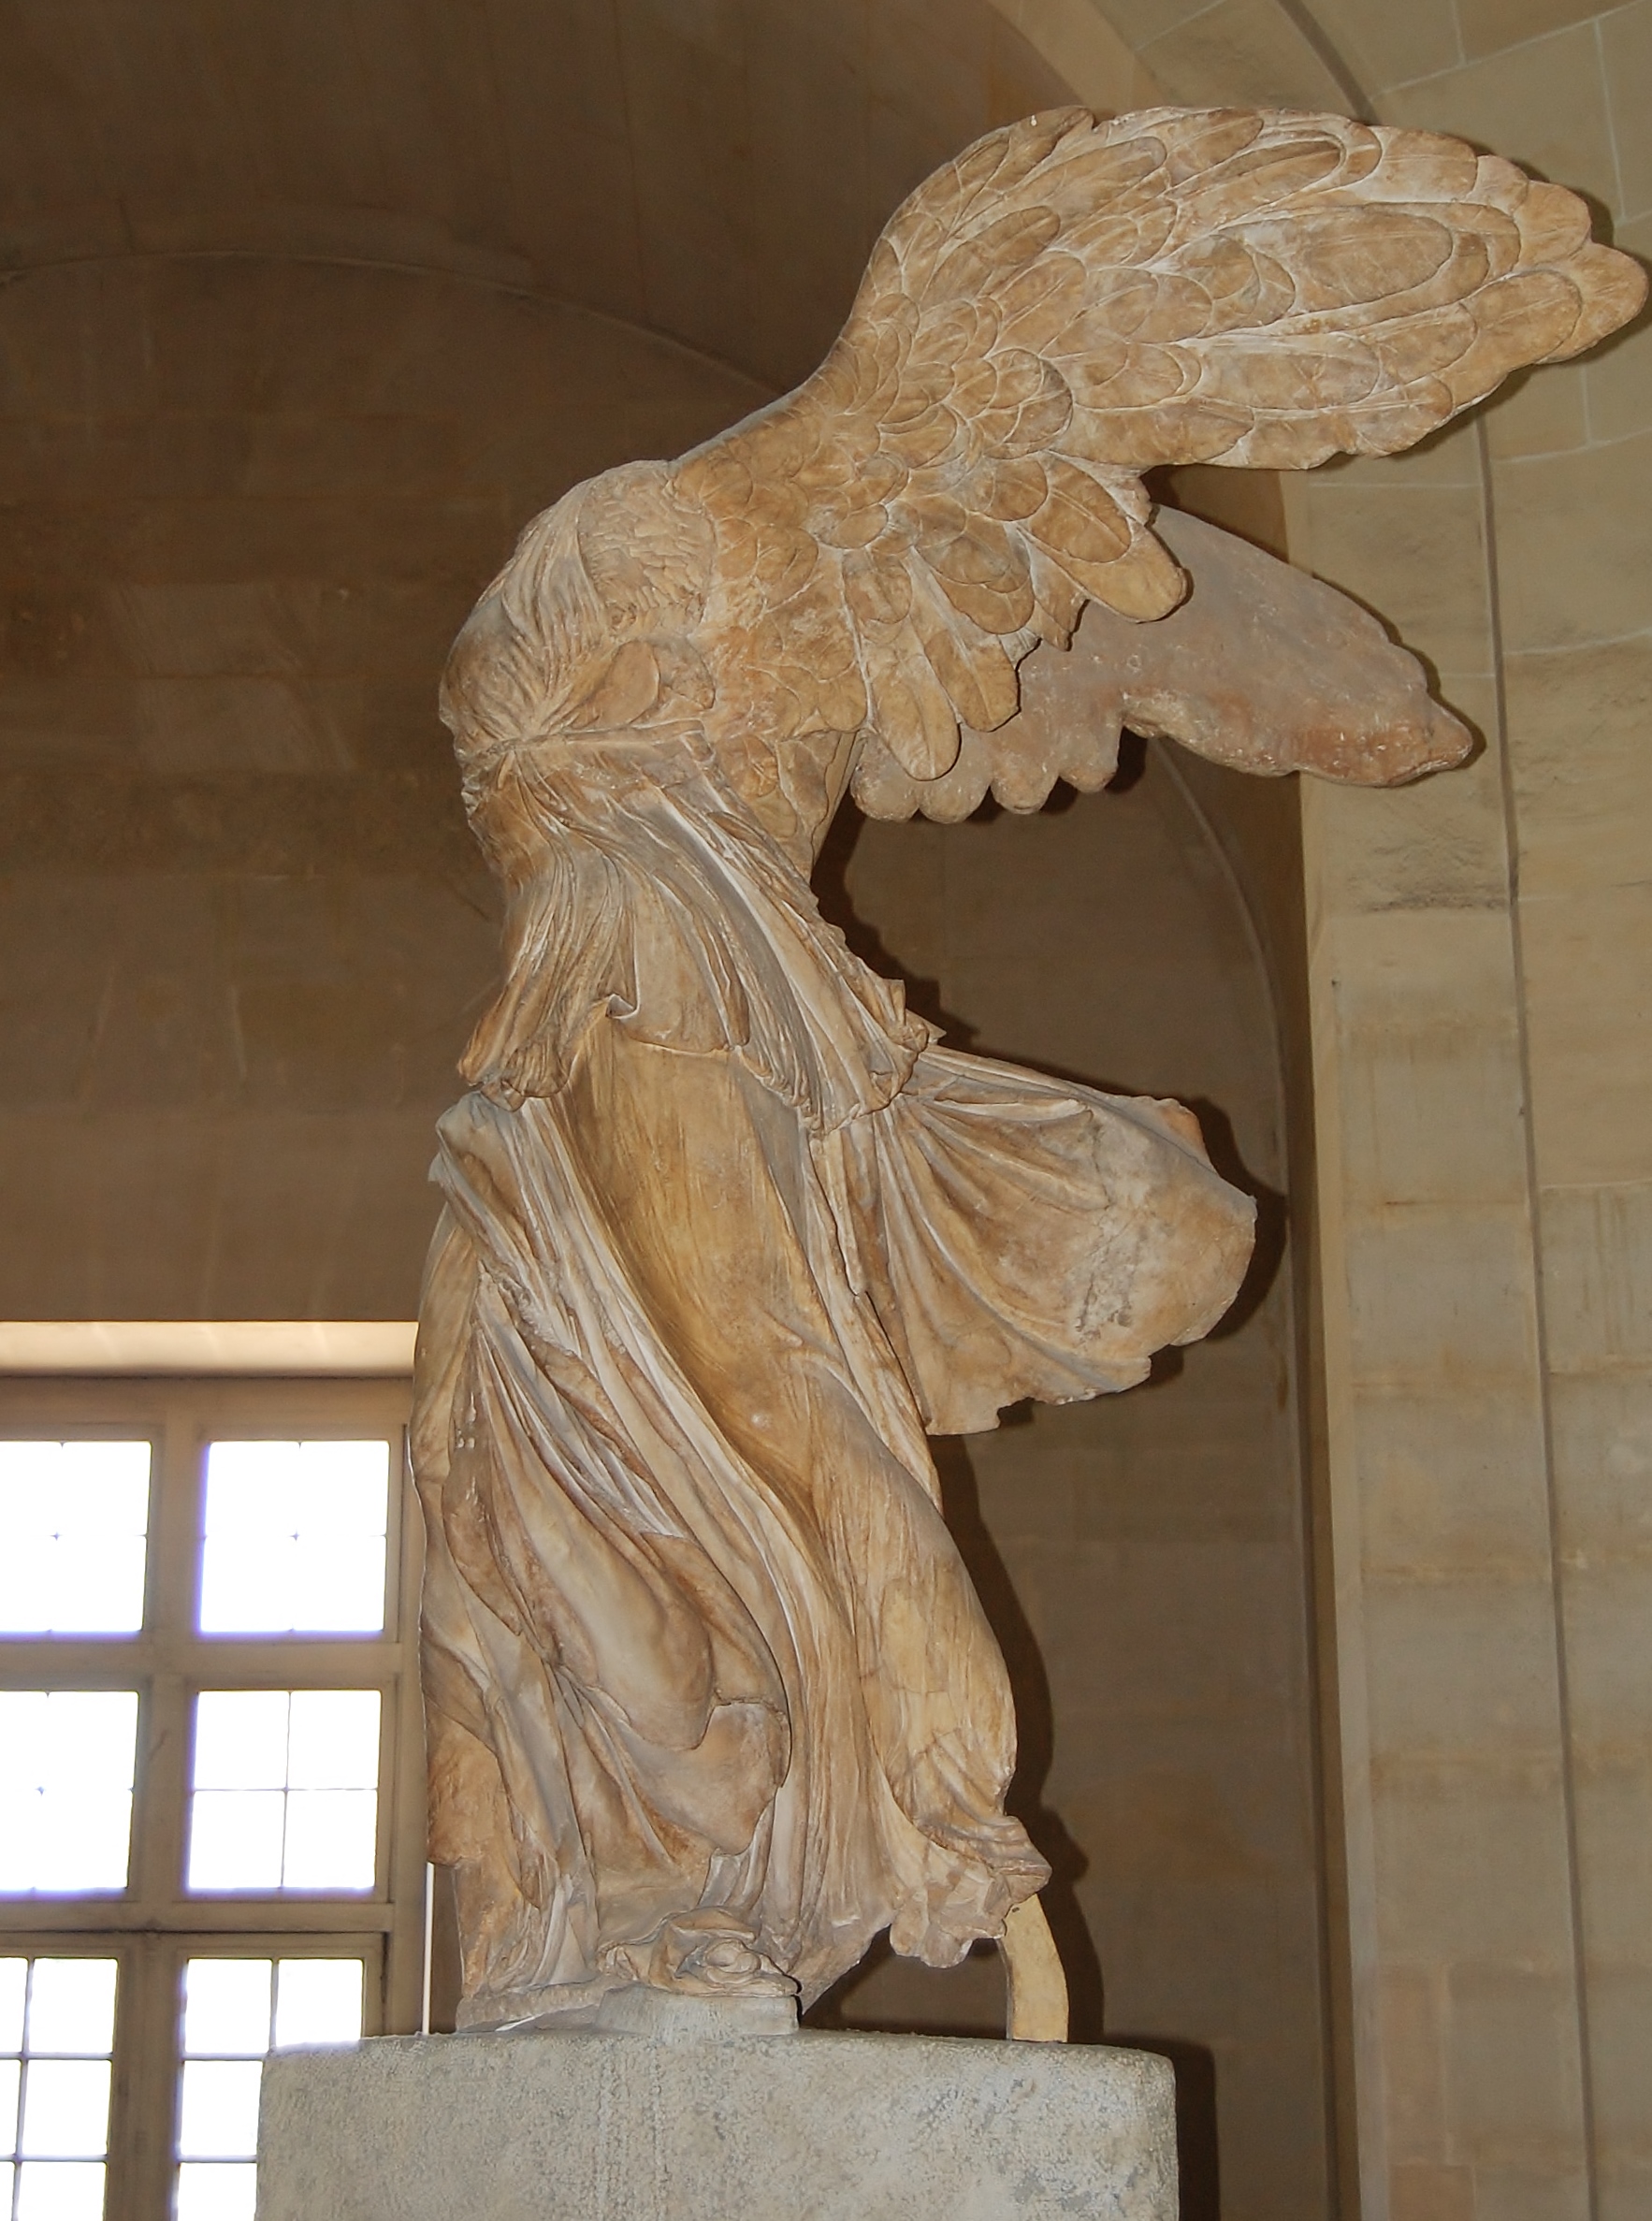 Louvre Museum, Winged Victory of Samothrace, also called the Nike of Samothrace, 2nd-century BC marble sculpture of the Greek goddess Nike (Victory), Paris, France Le splendide voyage